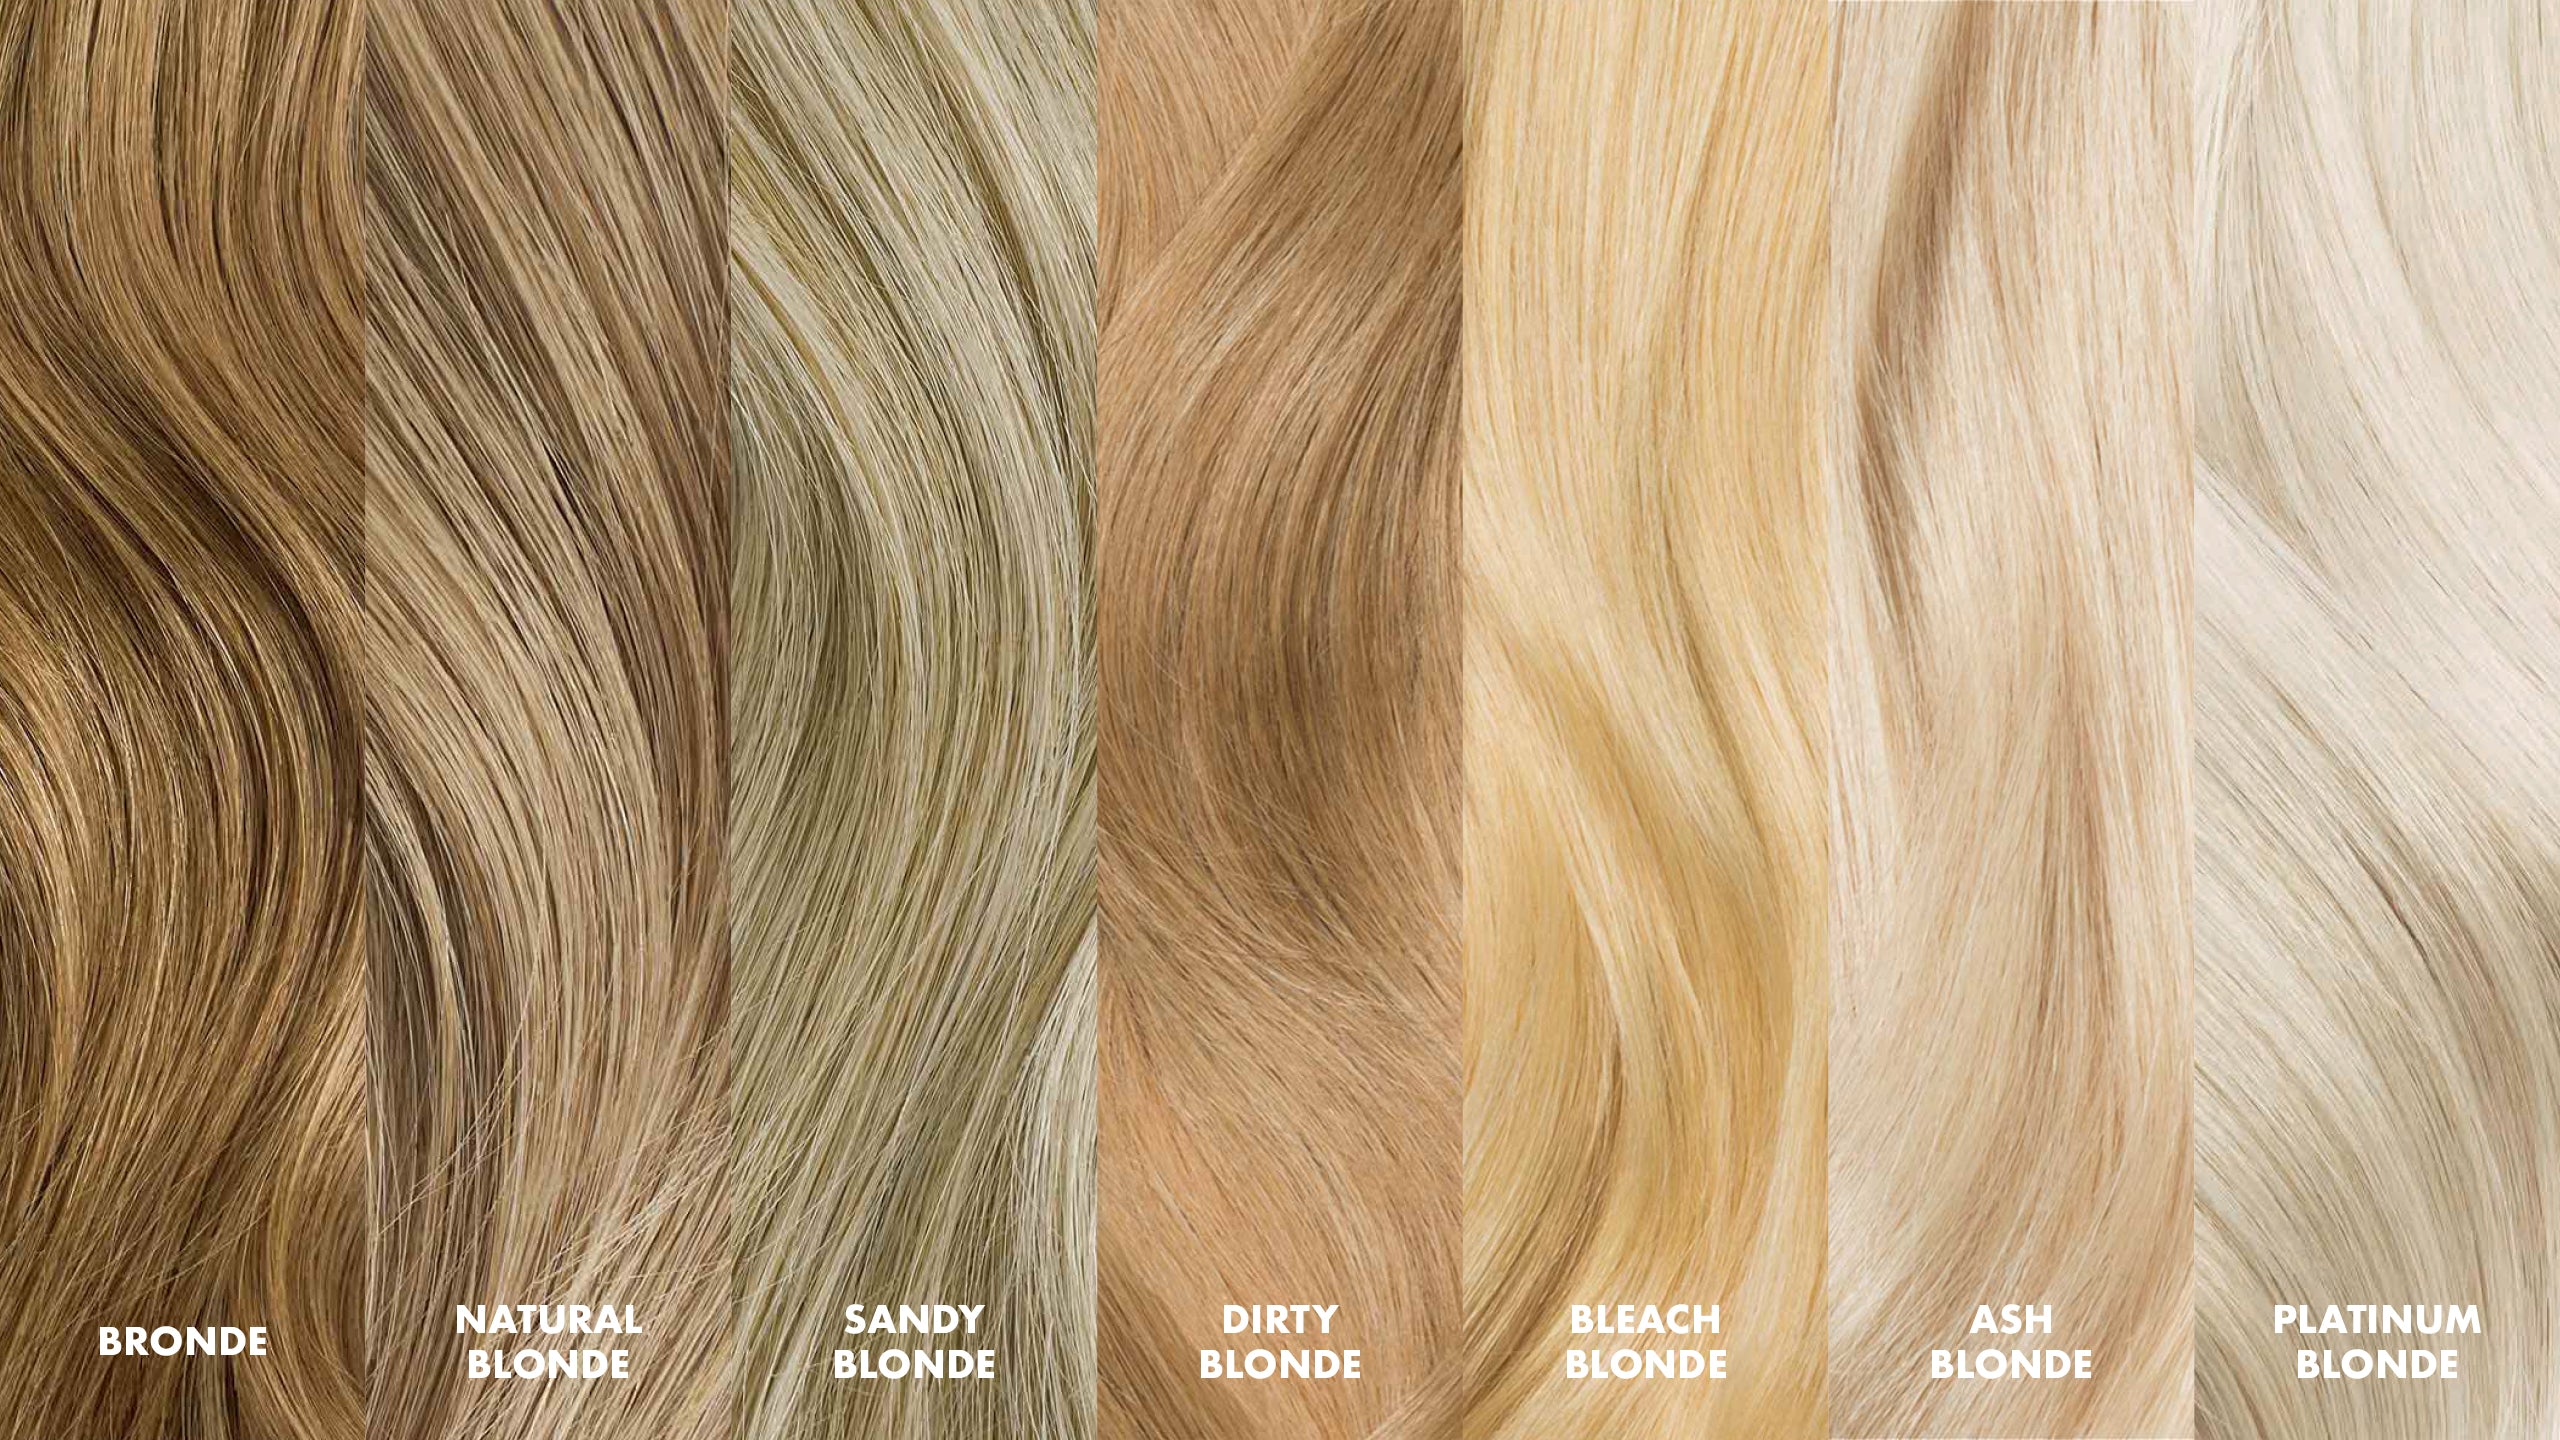 6. "The Difference Between Ash Blonde and Platinum Blonde Perms" - wide 7